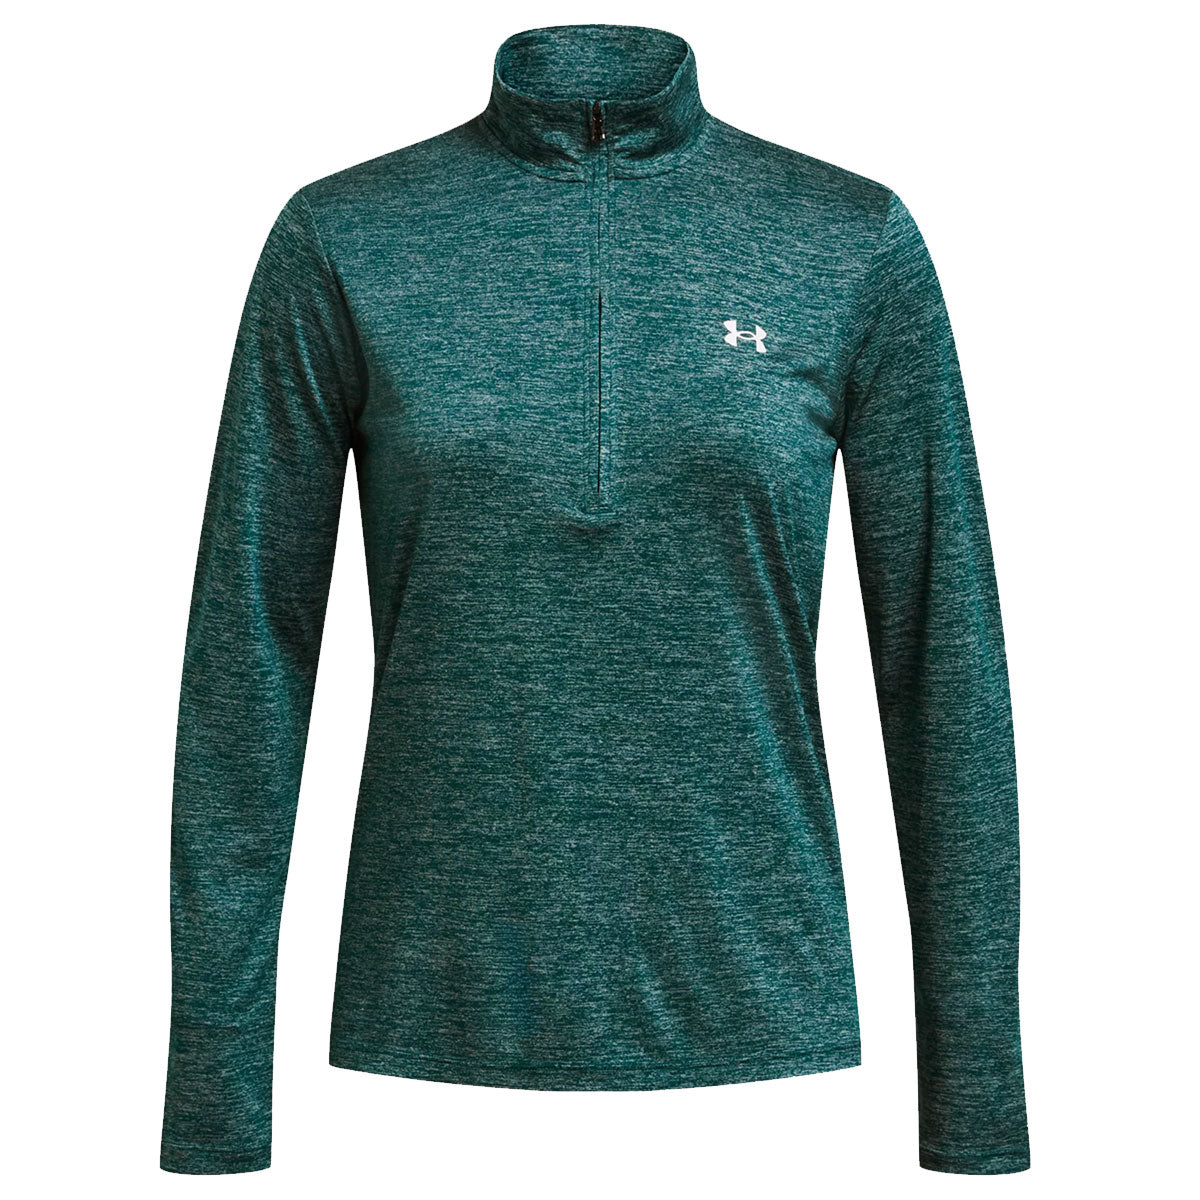 Under Armour Tech 1/2 Zip Twist Top - Womens - Hydro Teal/White